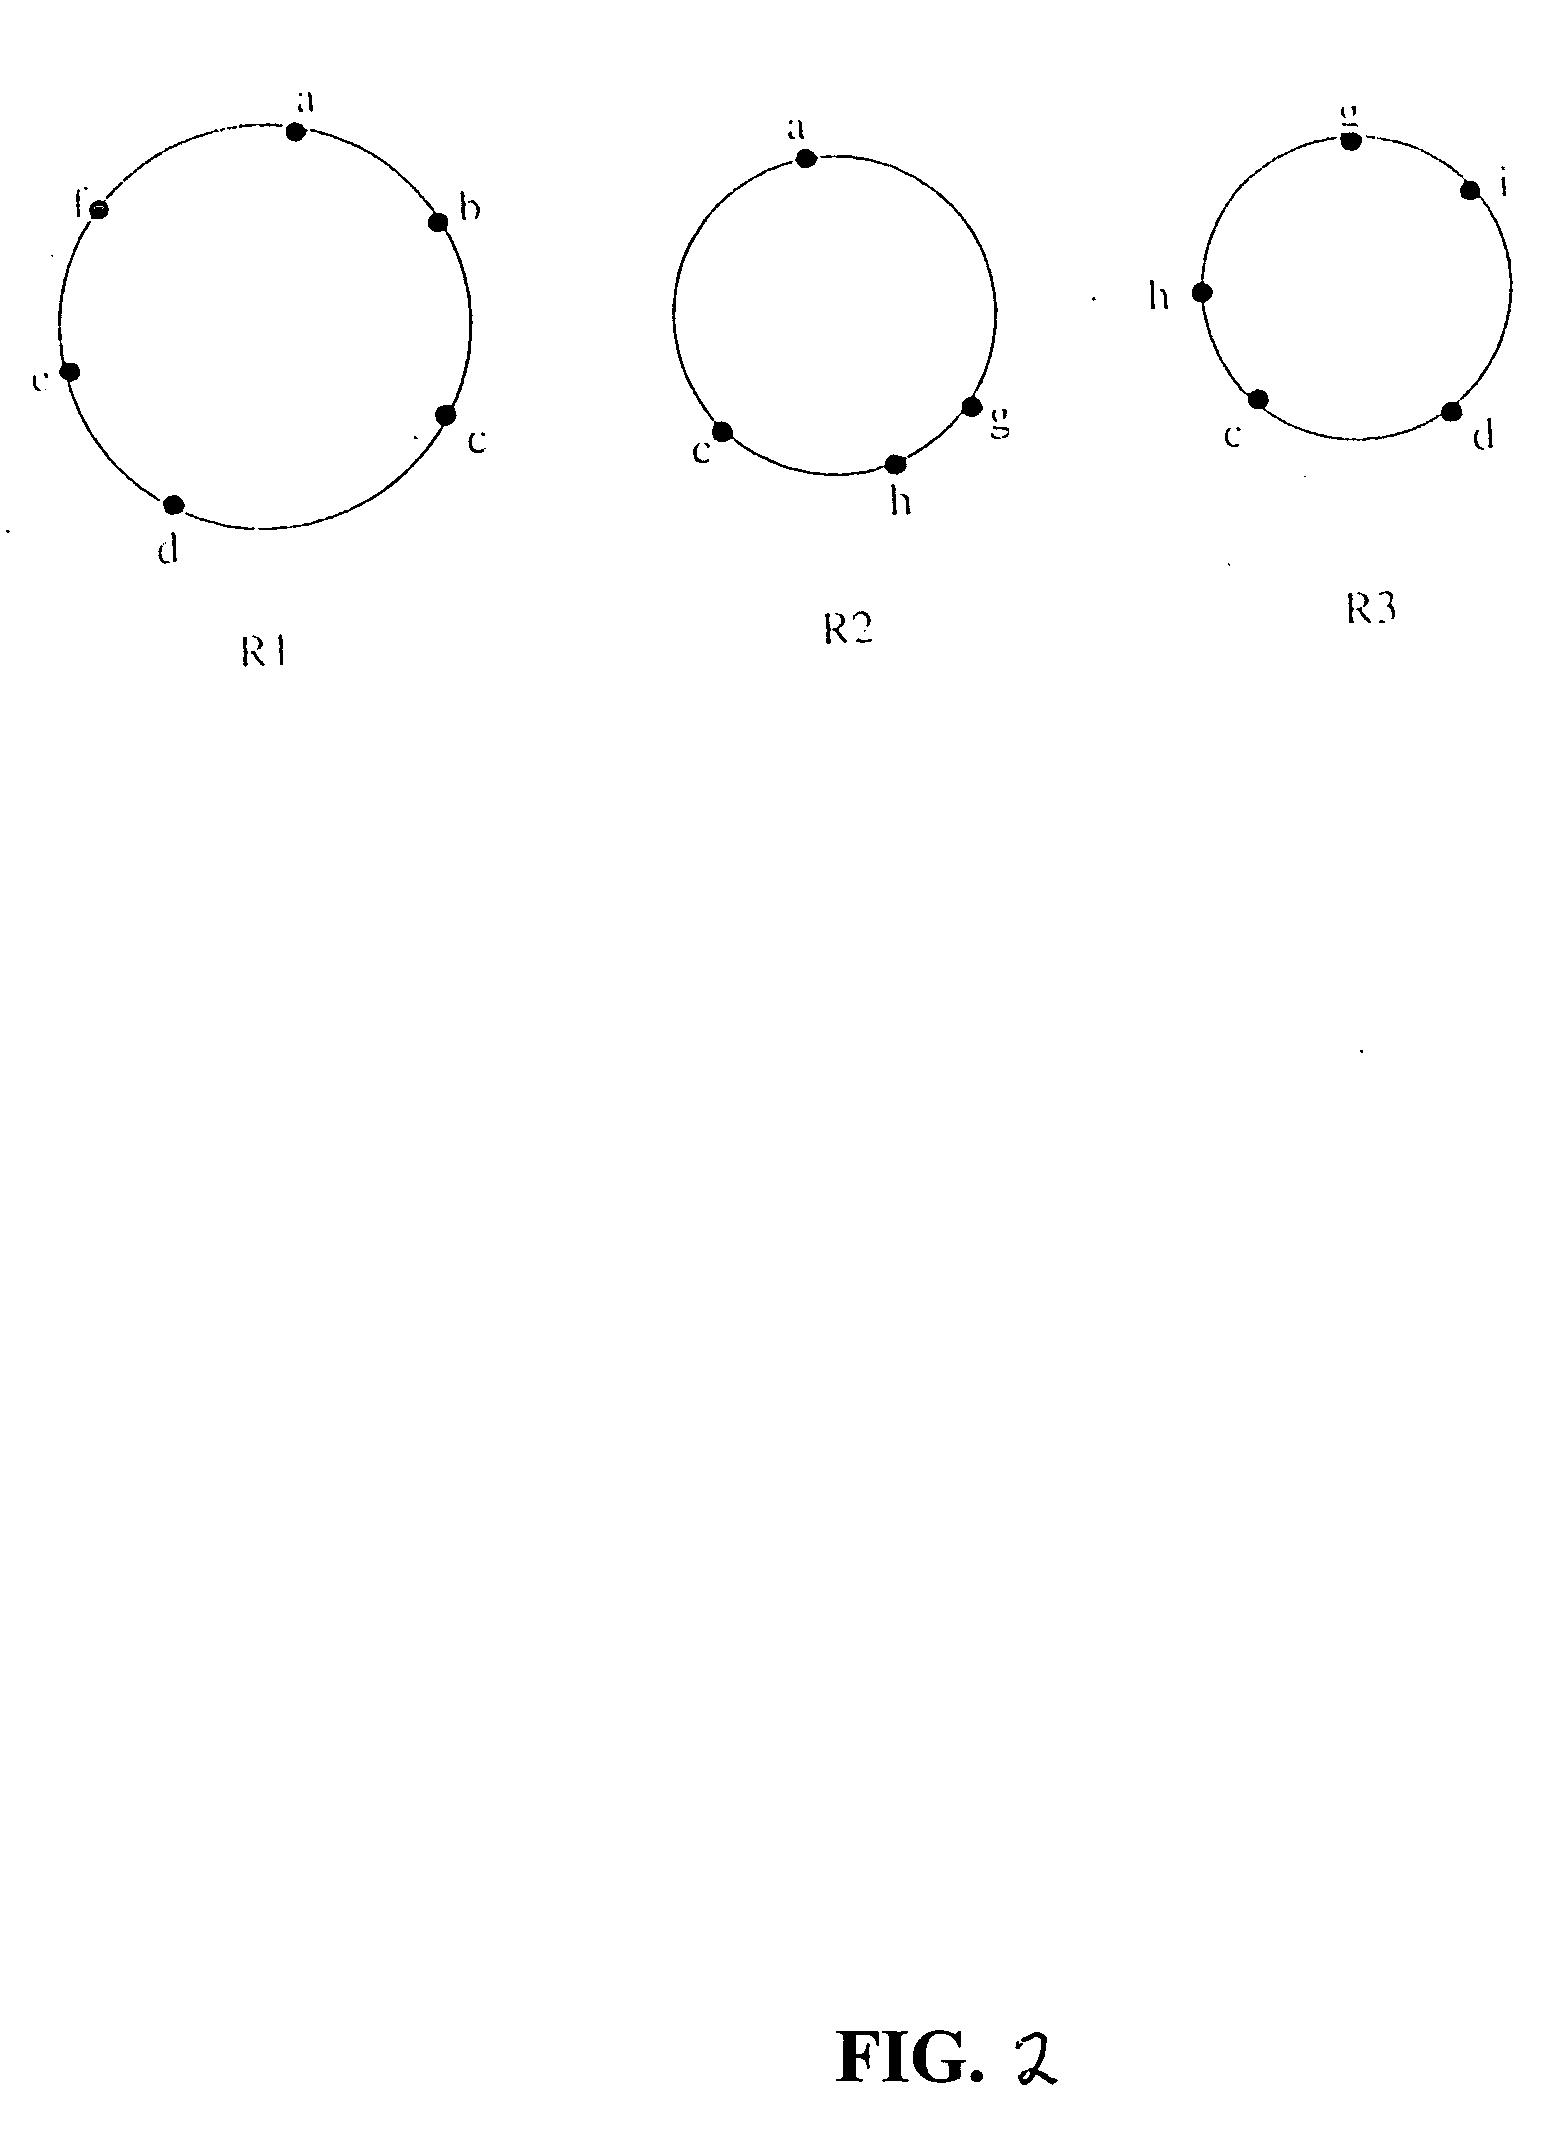 Method for determining a master ring for an optical communications network